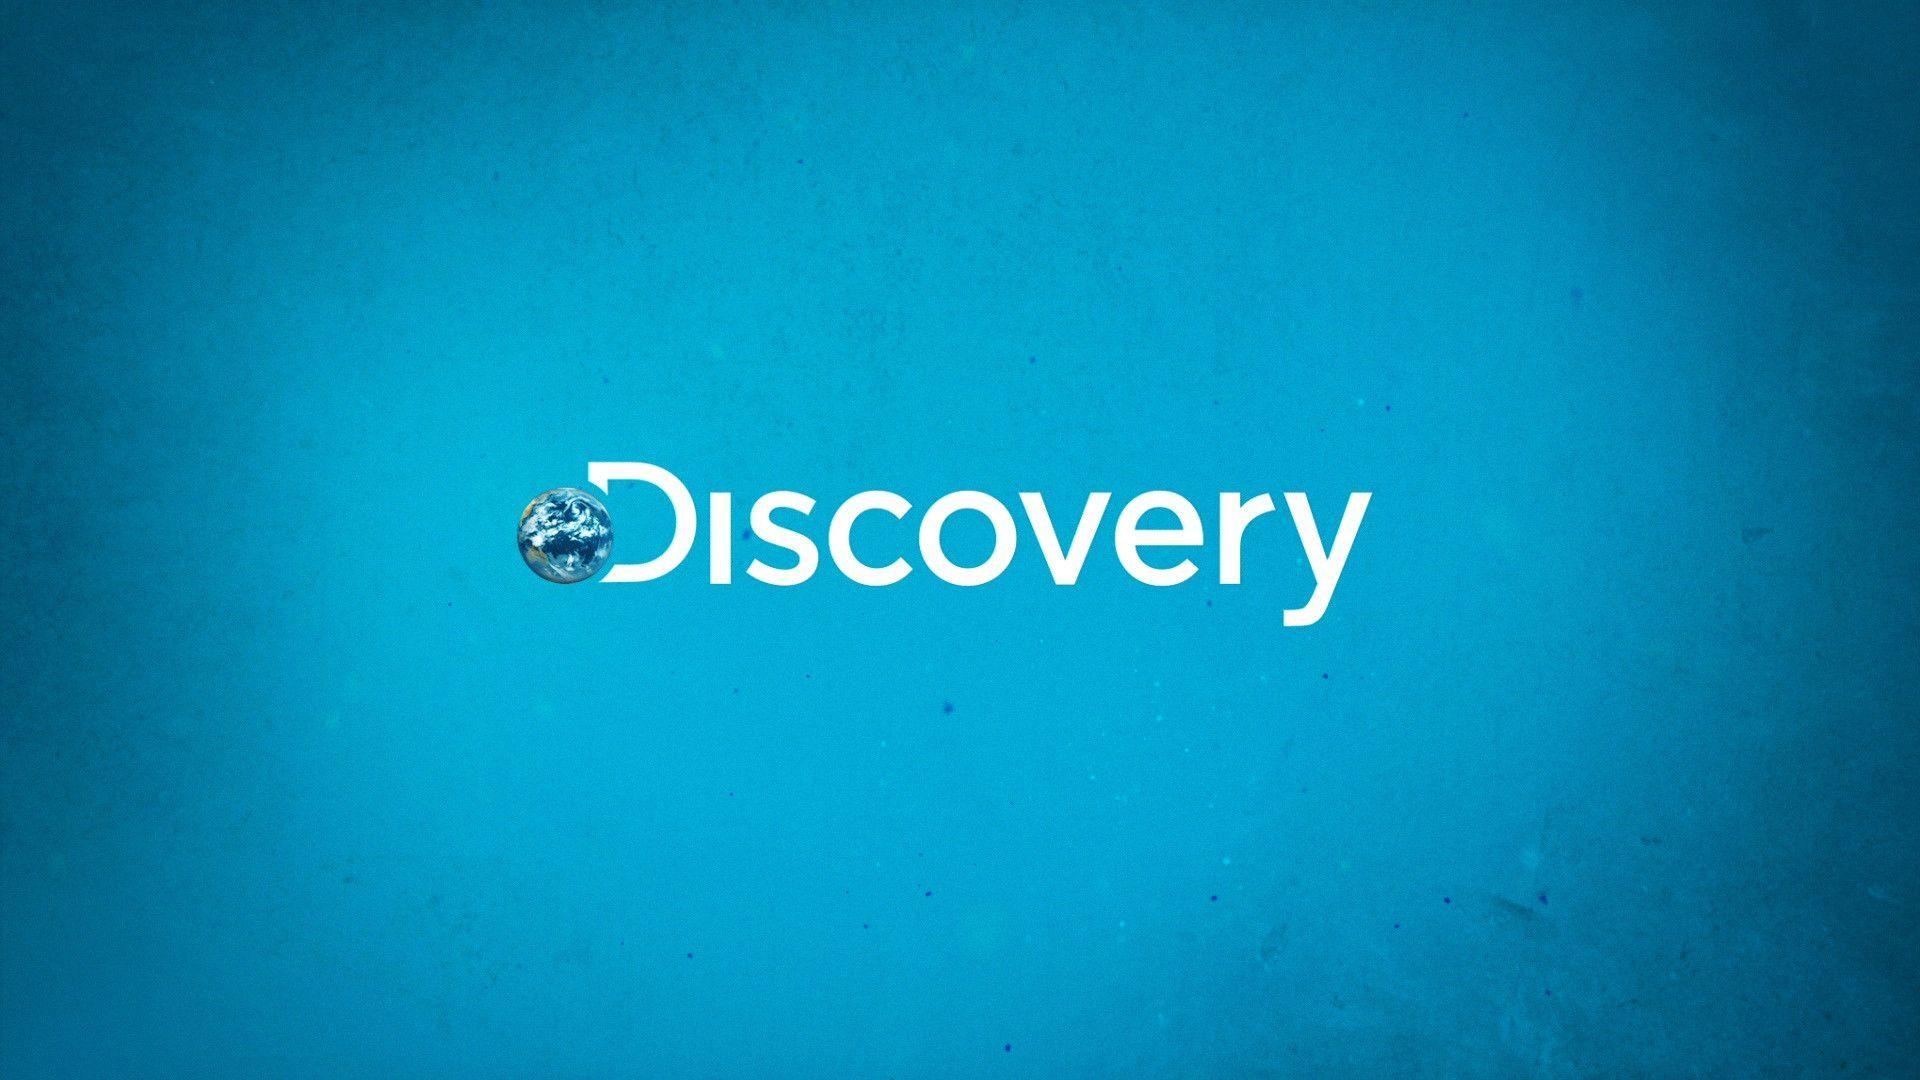 Discovery Channel Rebrand